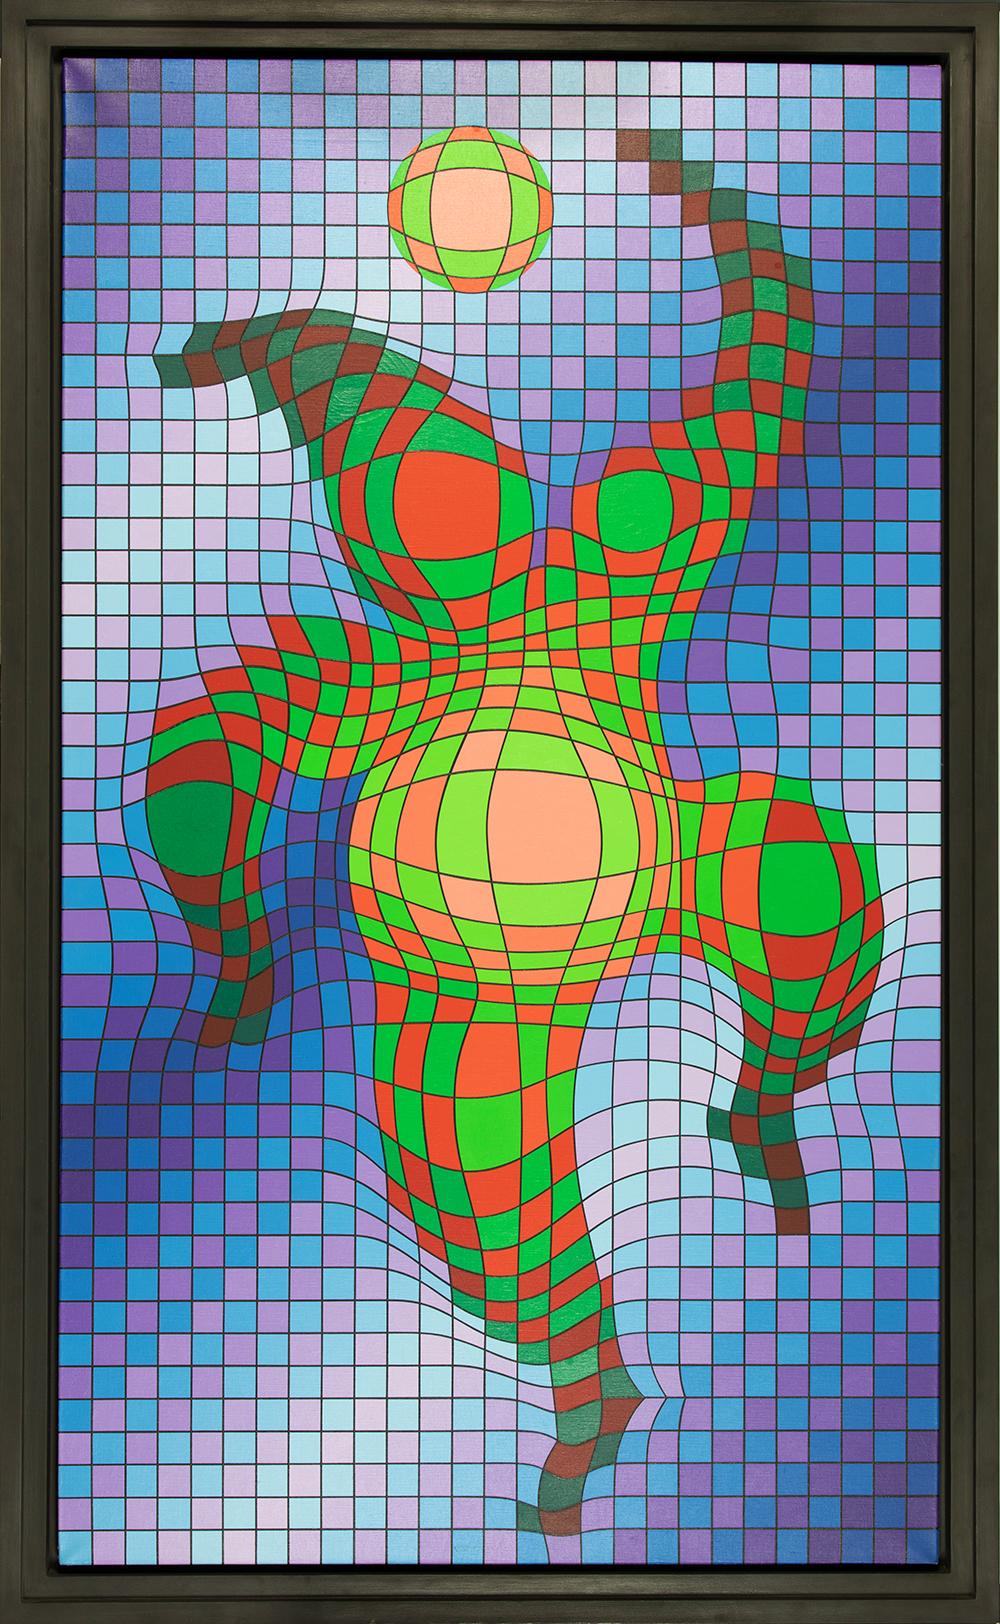 *UK BUYERS WILL PAY AN ADDITIONAL 5% IMPORT DUTY ON TOP OF THE ABOVE PRICE

Le Jongleur by Victor Vasarely (1906-1997)
Acrylic on canvas
137.5 x 80.5 cm (54 ¹/₈ x 31 ³/₄ inches)
Signed lower centre, vasarely.
Executed circa 1985

Provenance
Private